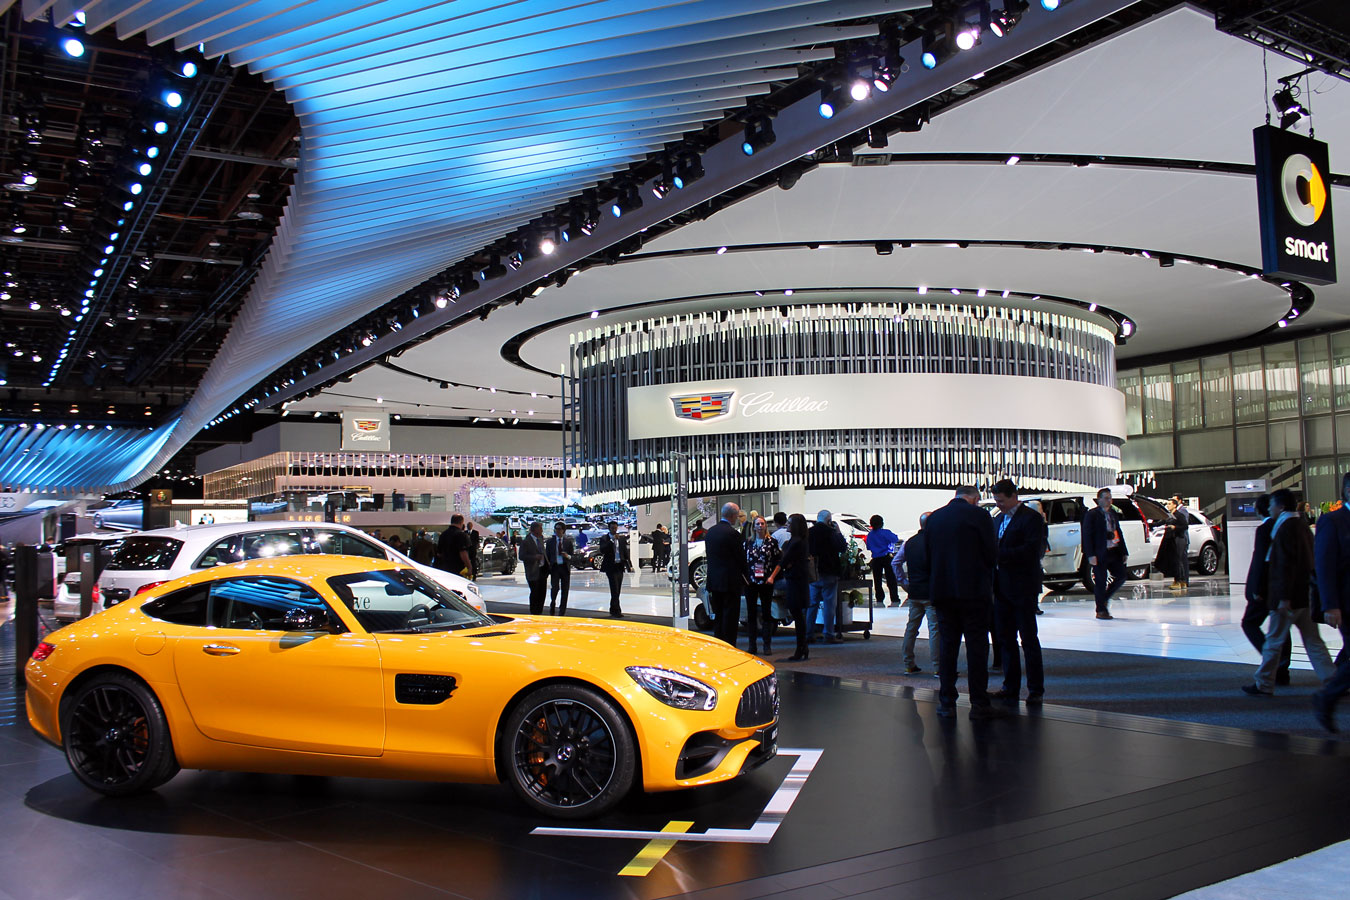 9 Tips For A Stress-Free Detroit Auto Show Experience // Thinking of visiting the Detroit Auto Show (North American International Auto Show/NAIAS) but aren't sure where to start? Check out these 9 tips that will help you plan an amazing visit! (via Wading in Big Shoes)